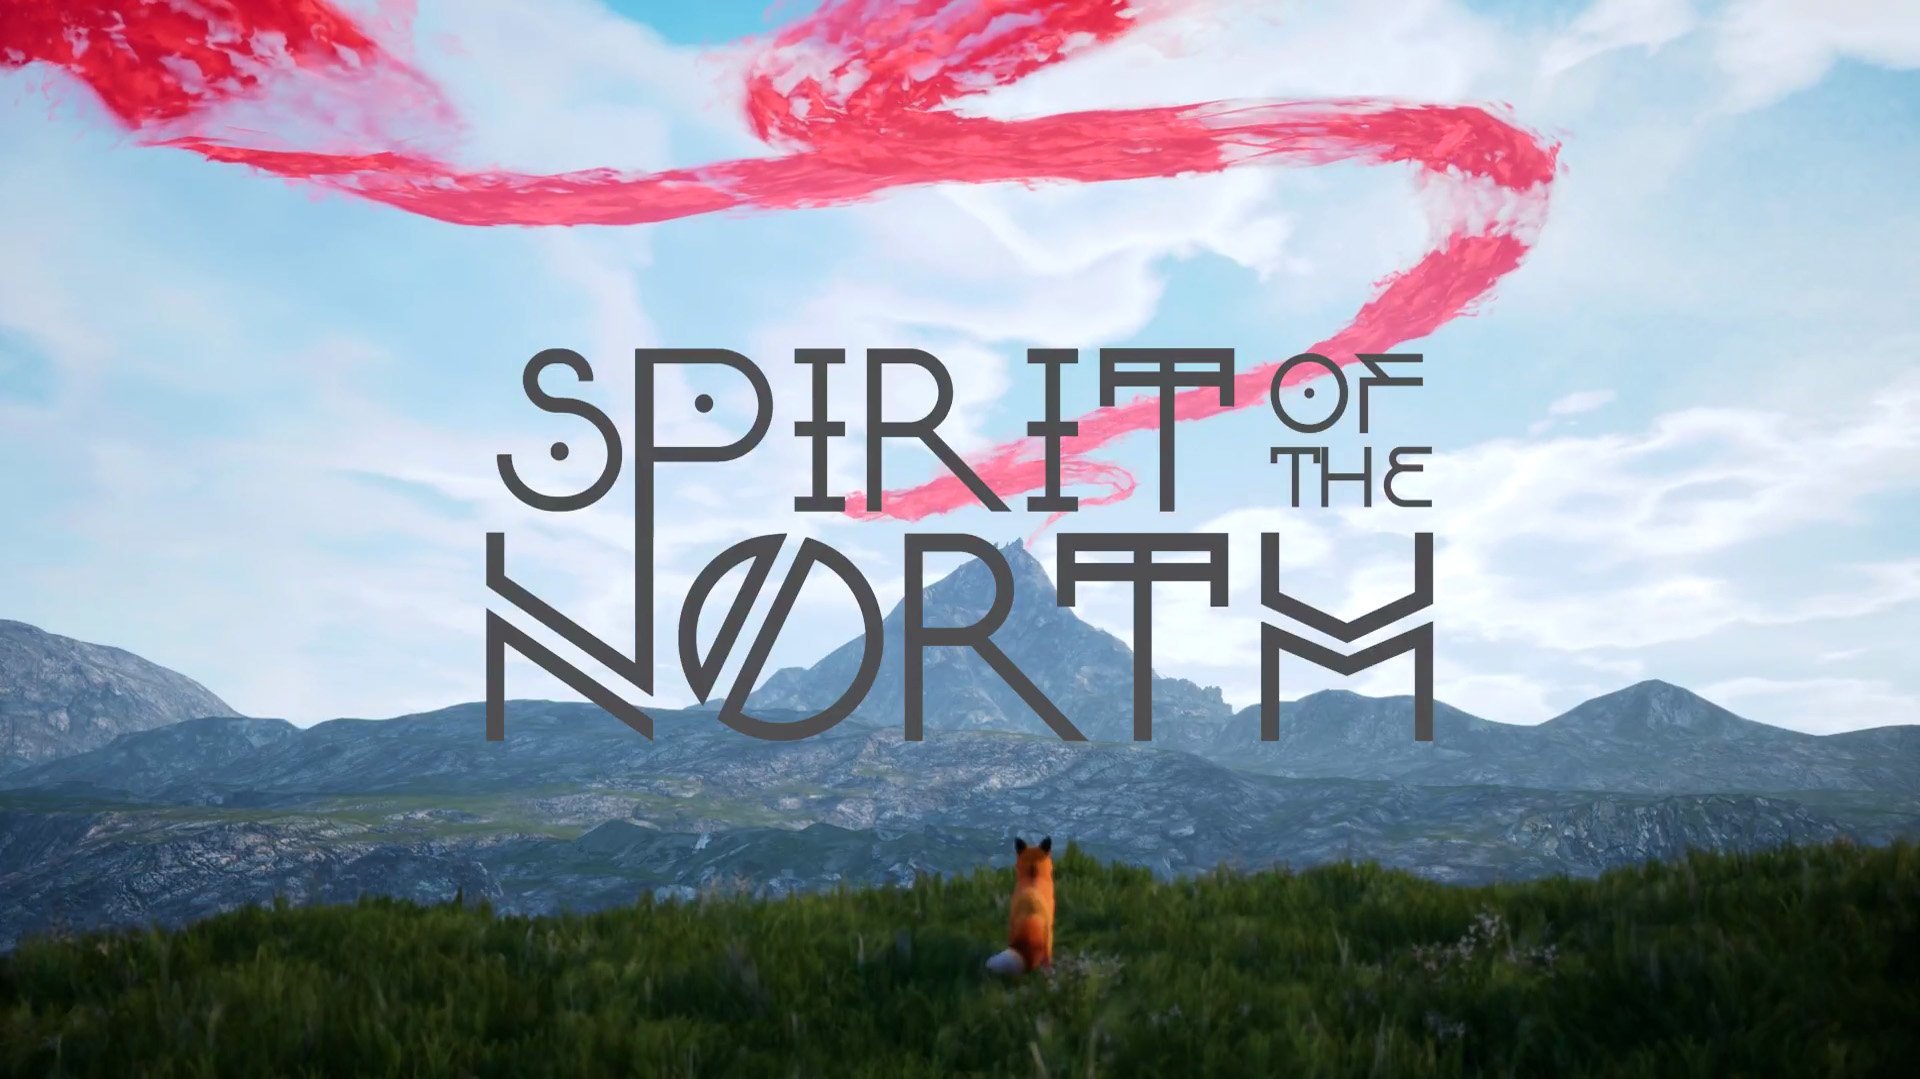 spirit of the north book